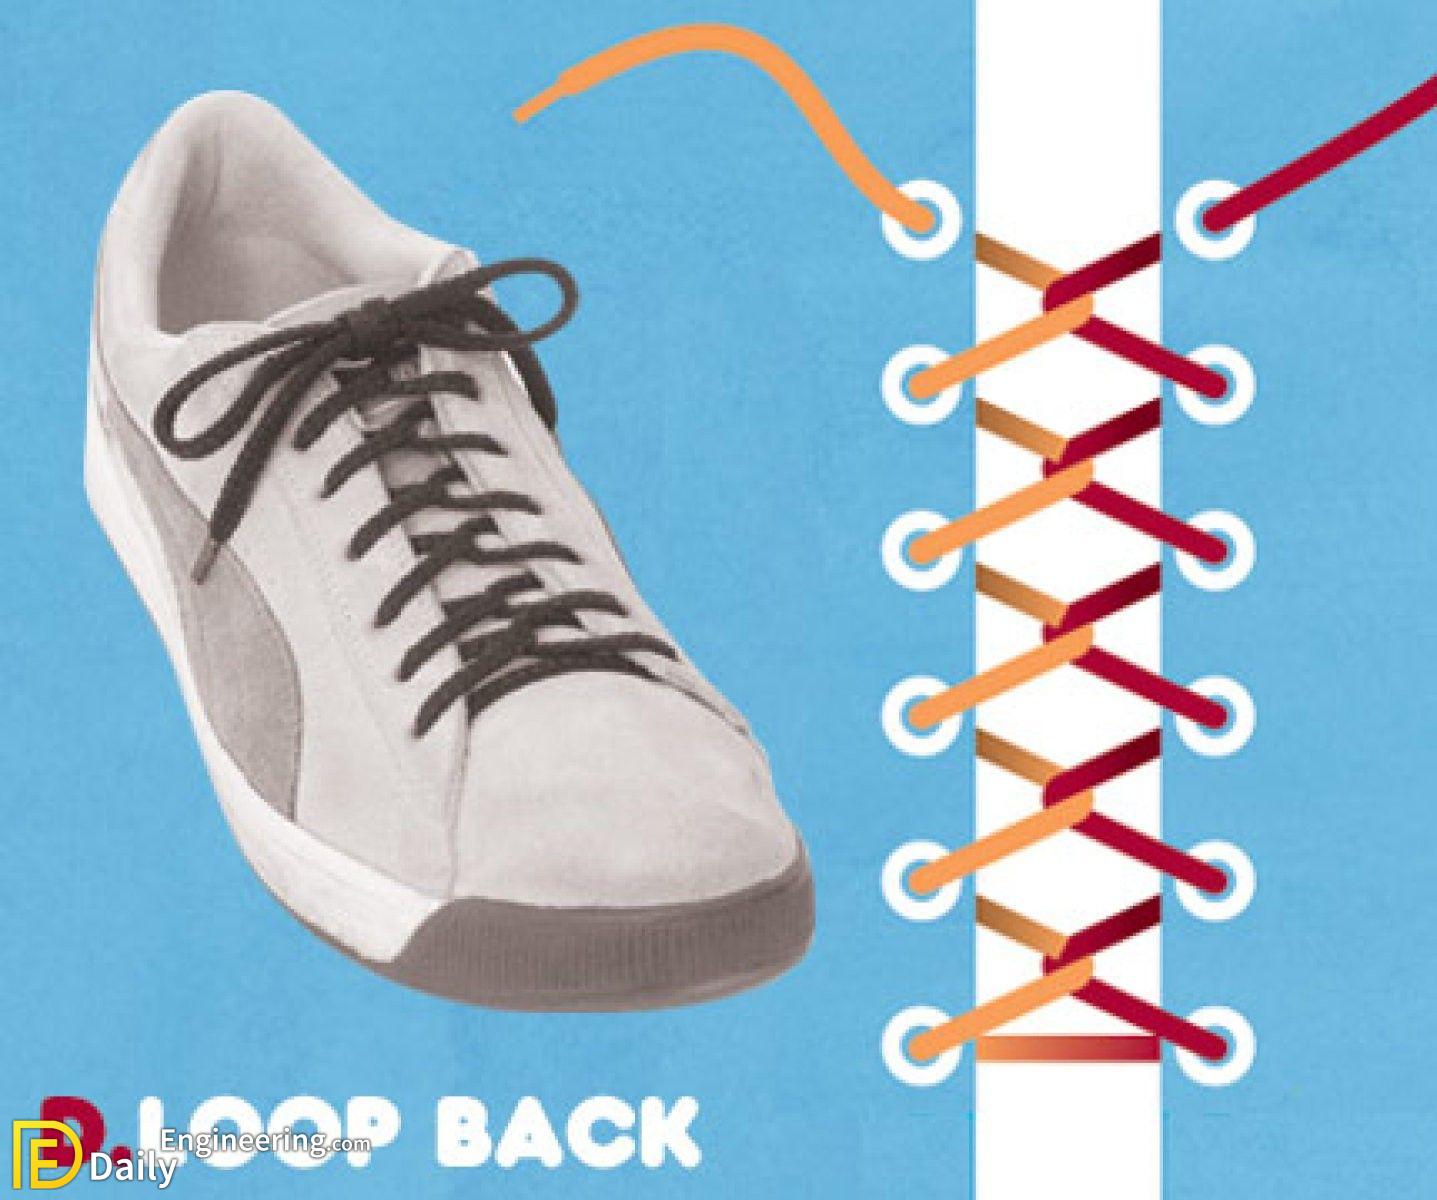 15 Different Cool Ways To Tie Shoelaces - Daily Engineering